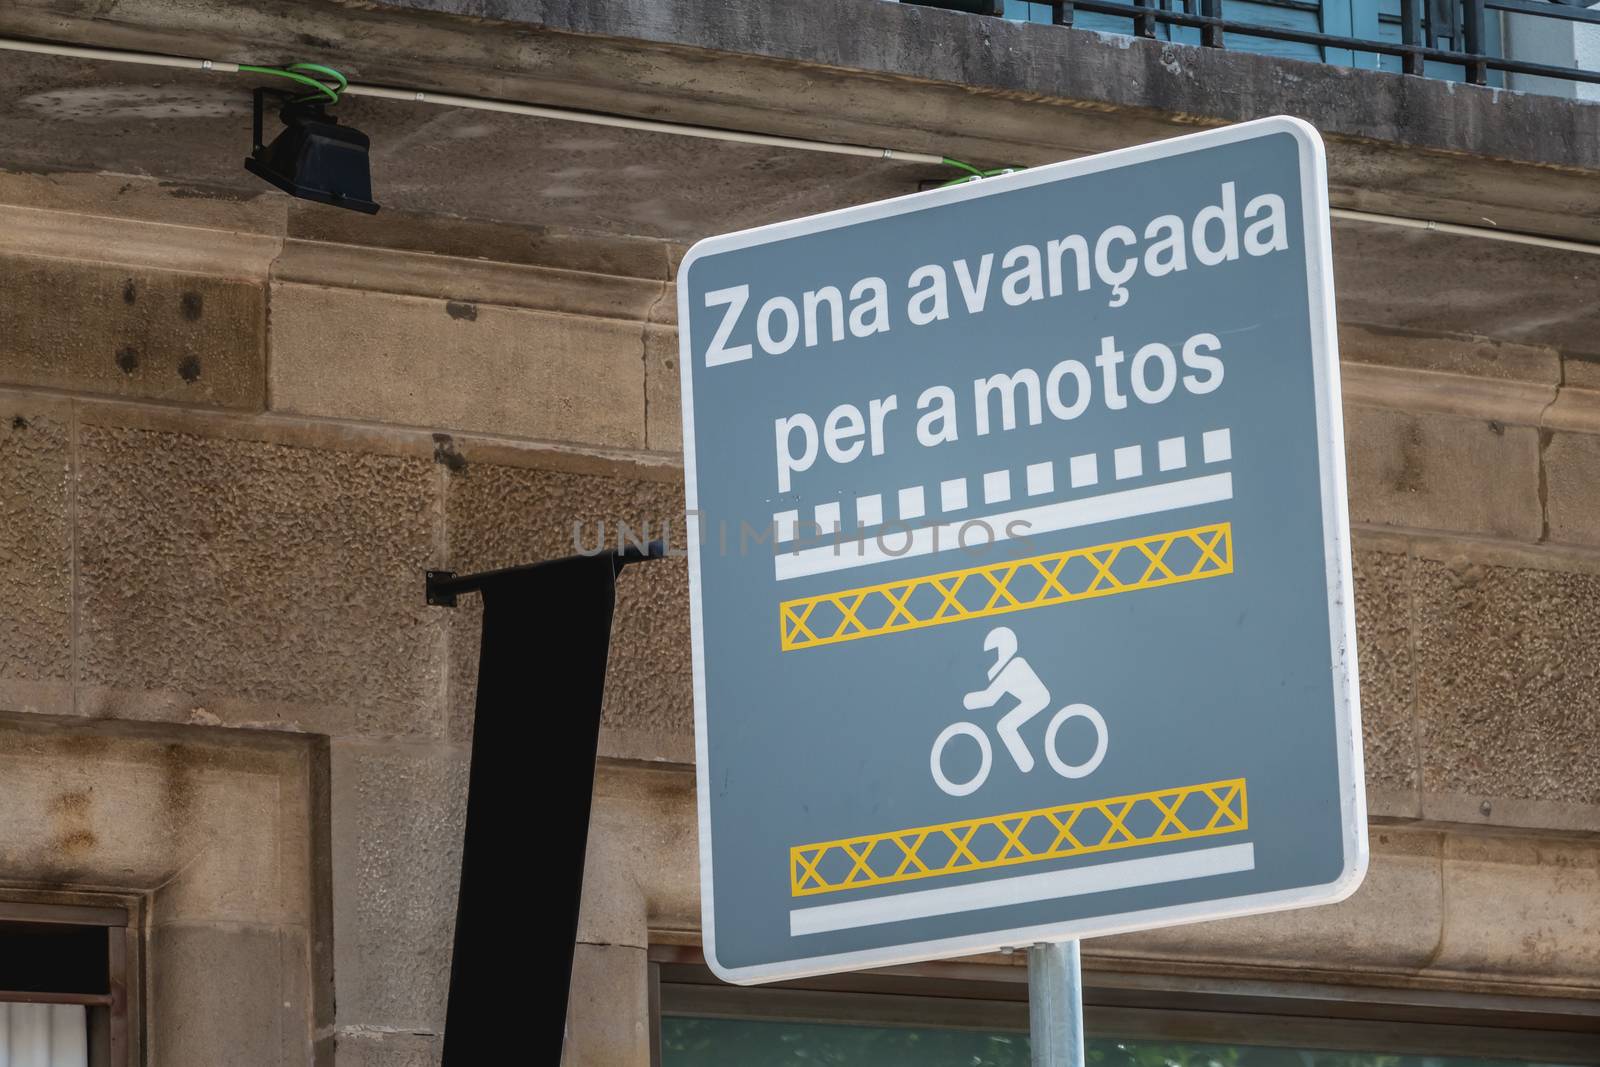 road sign indicating a zone reserved for motorcycles in Barcelona, Spain